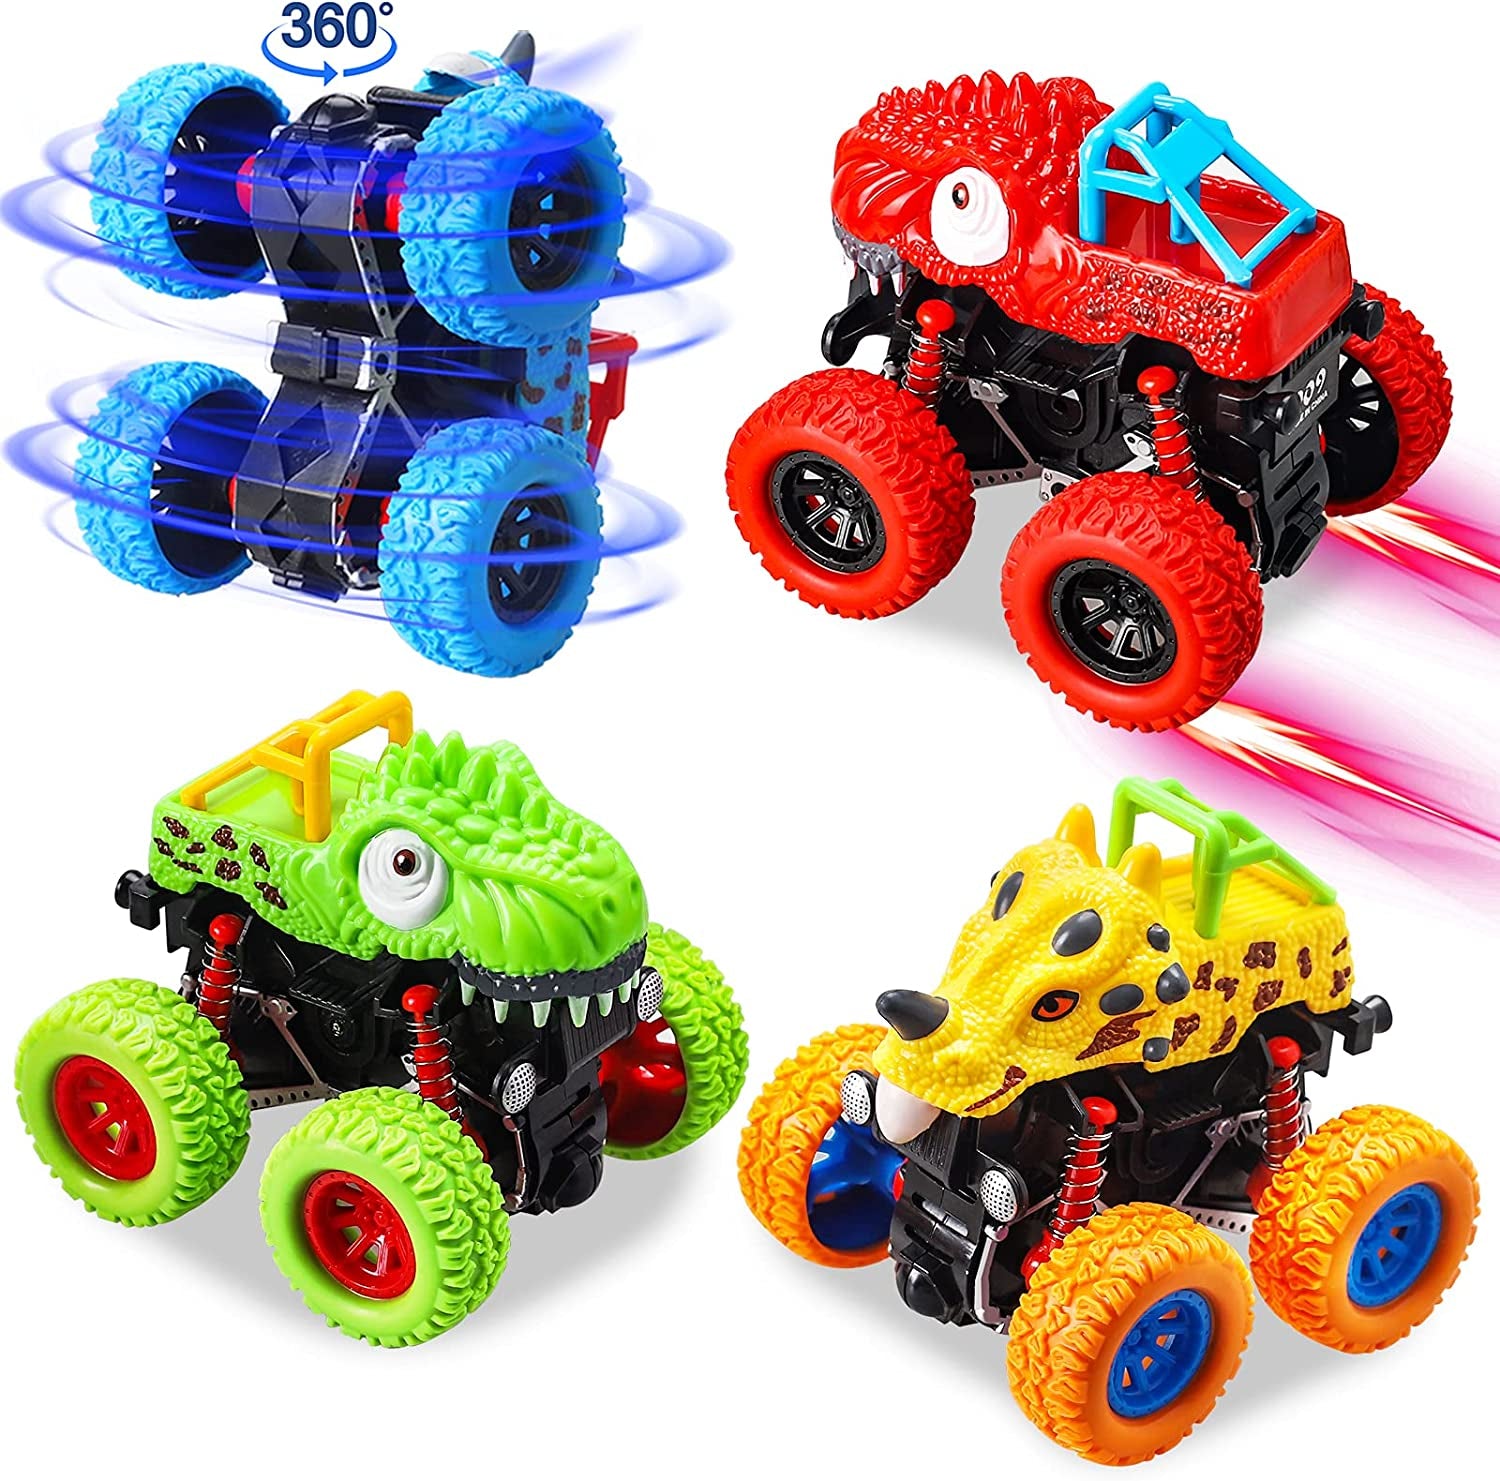 Aovowog Toddler Monster Truck Toys for Boys, 4 Pack Pull Back Cars, Friction Powered Cars for Kids, Dinosaur Toys for 3 4 5 6 Year Old Boys - Christmas Birthday Party Gift for Kids